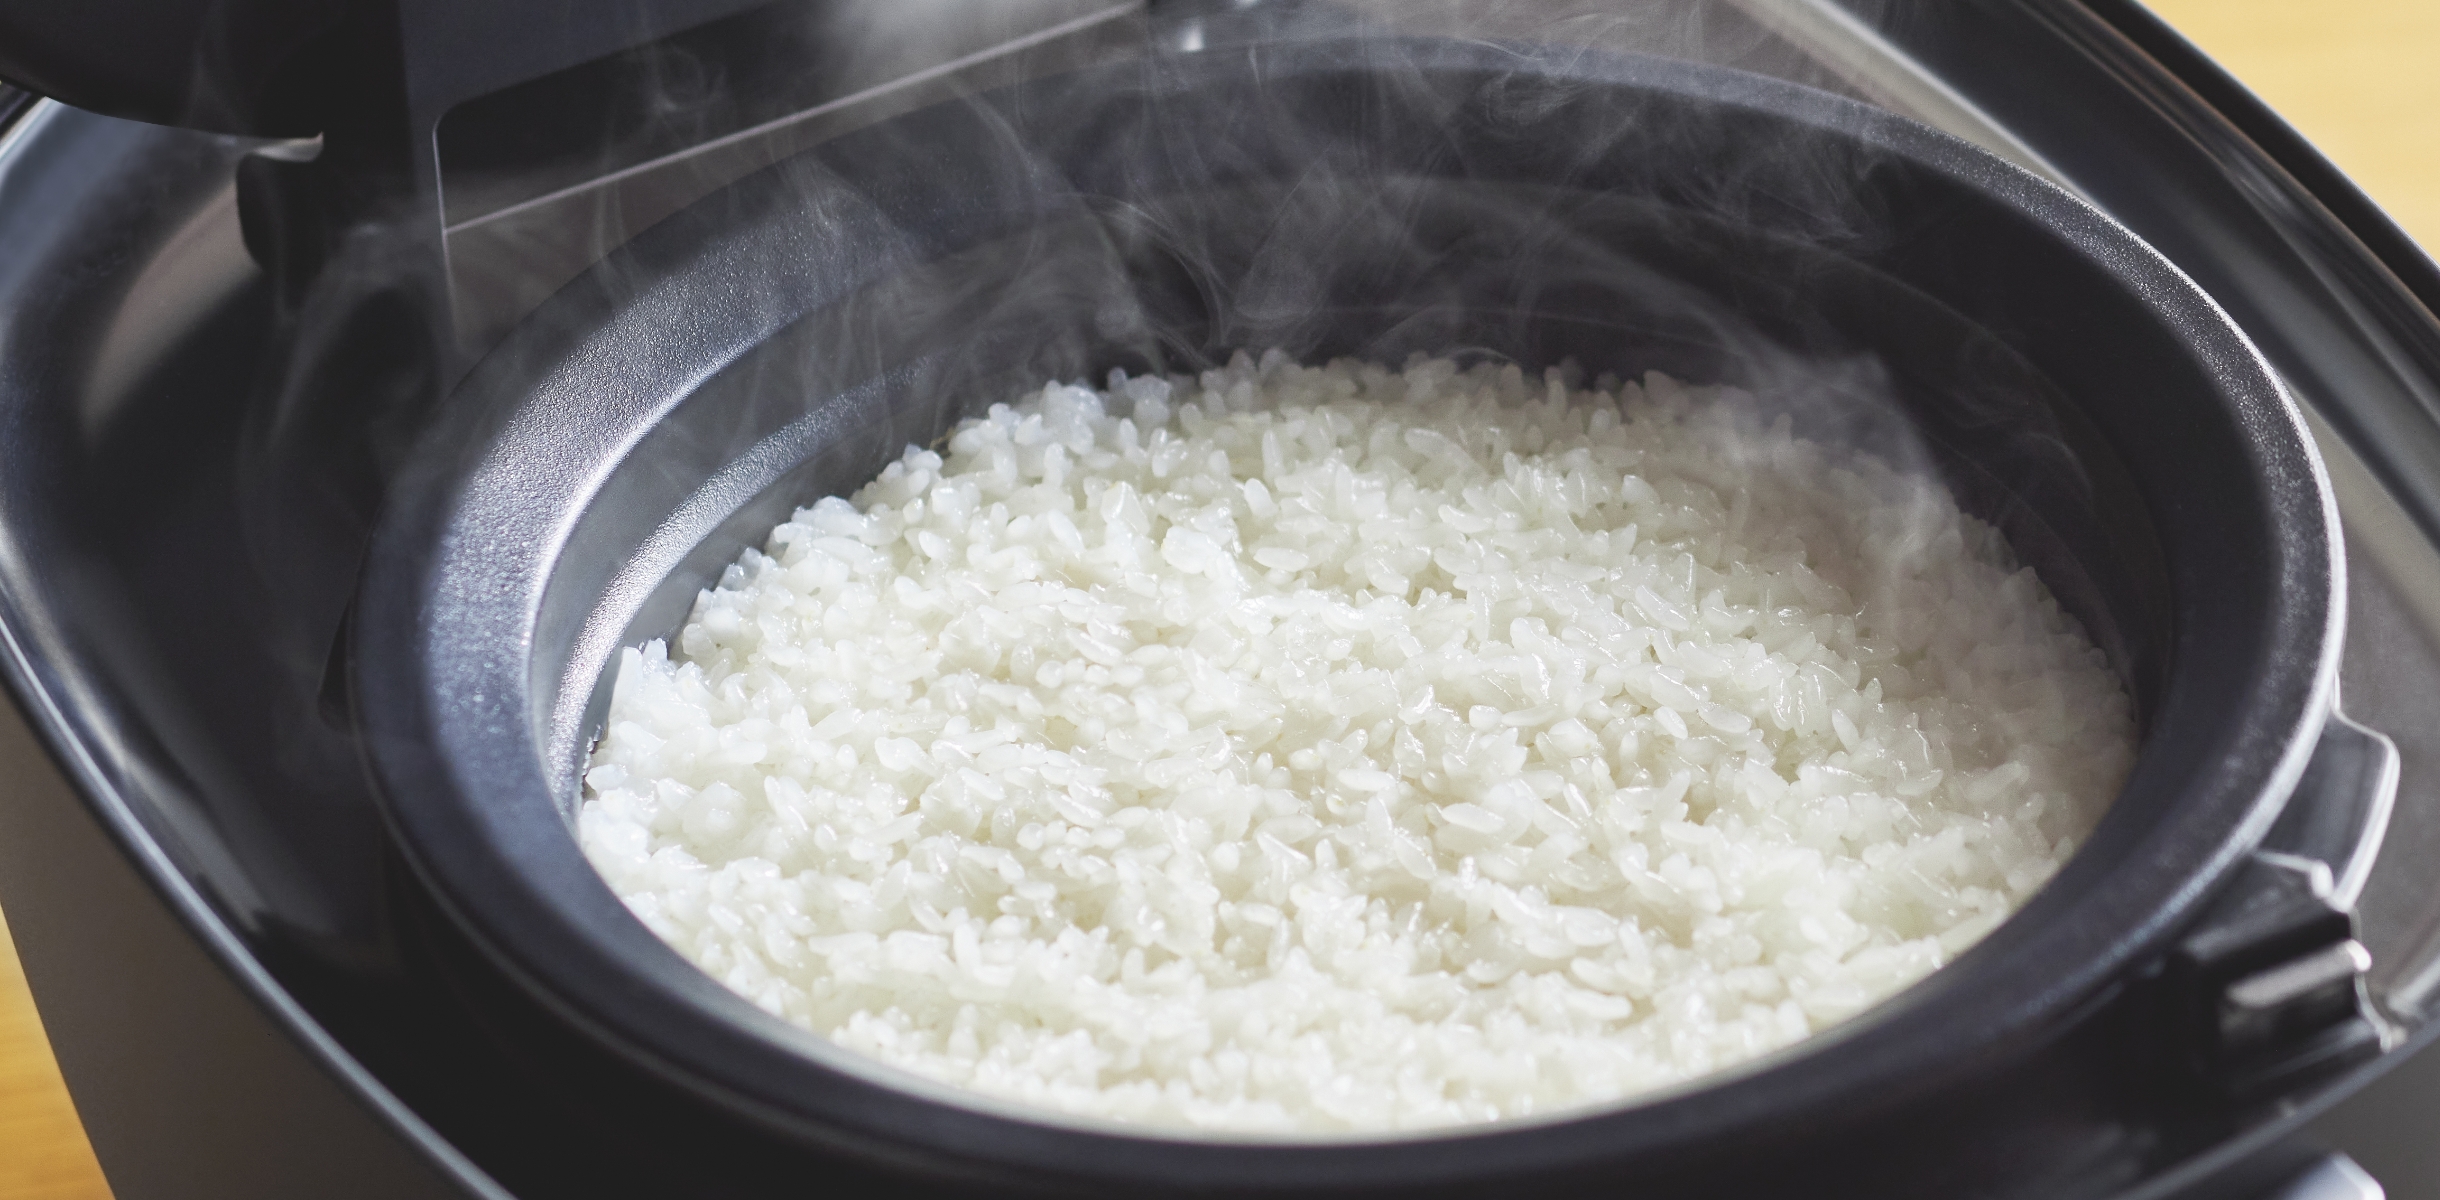 Our goal with the ご泡火炊き rice cooker was to cook rice as tasty as that served at a first class ryotei restaurant.